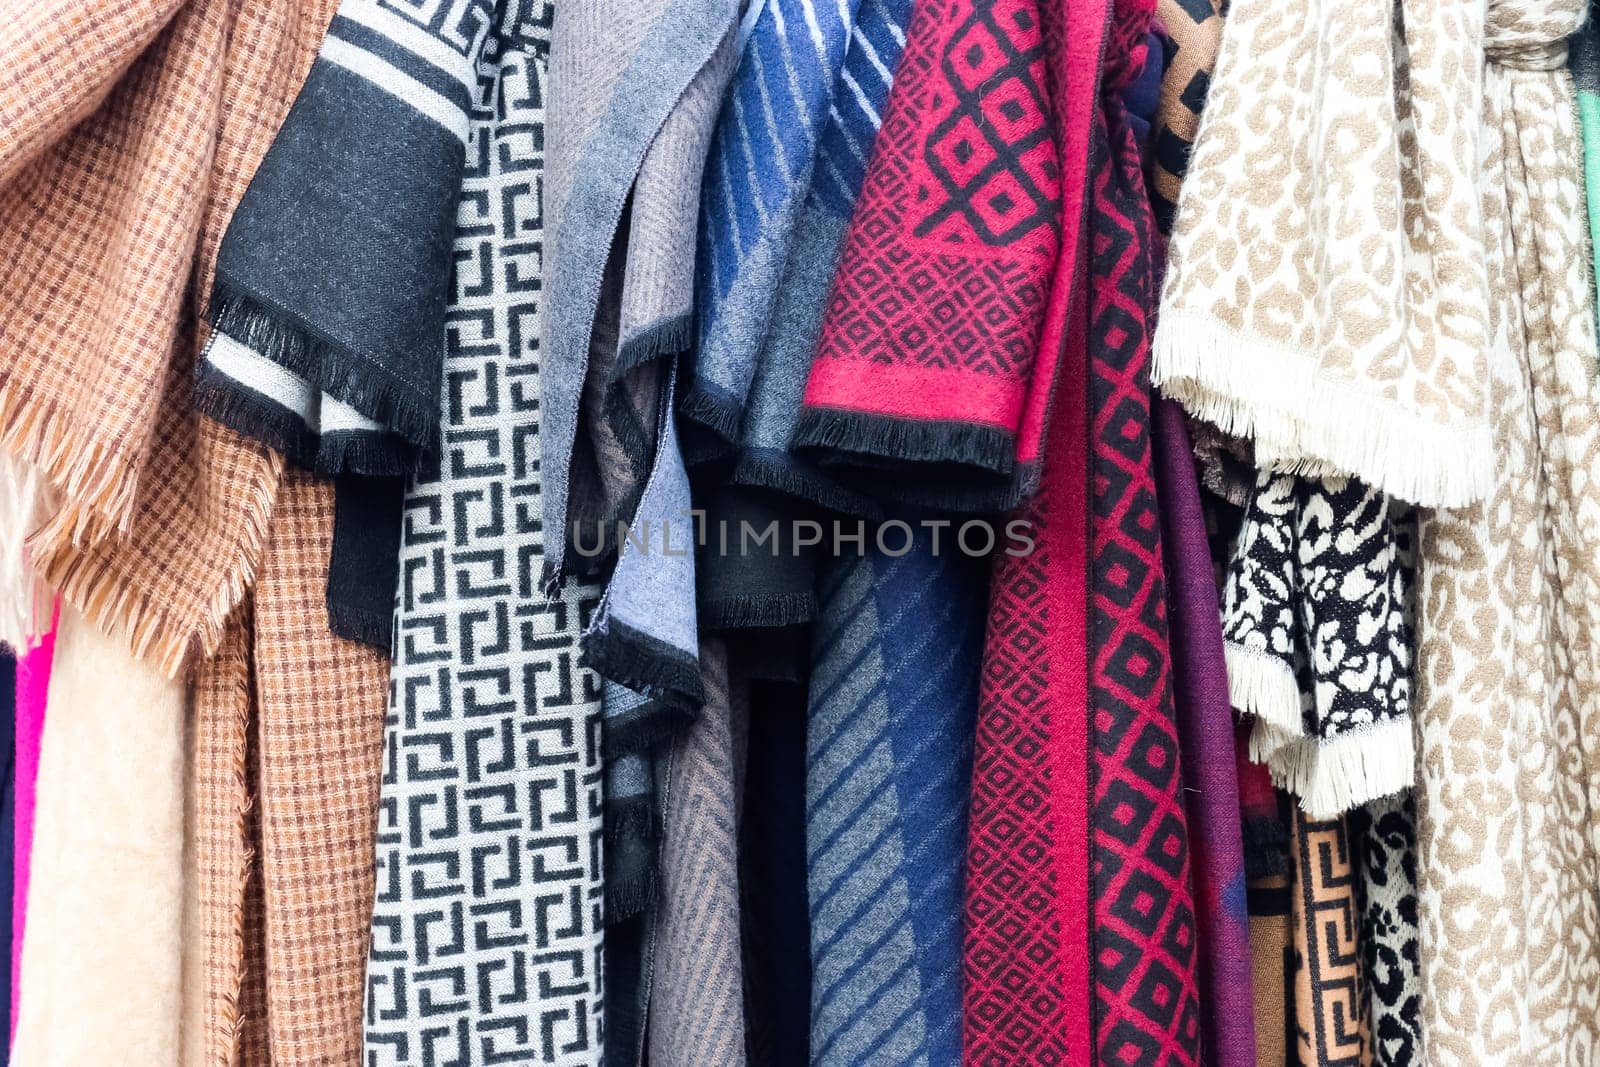 View on samples of cloth and fabrics in different colors found at a german fabrics market. by MP_foto71